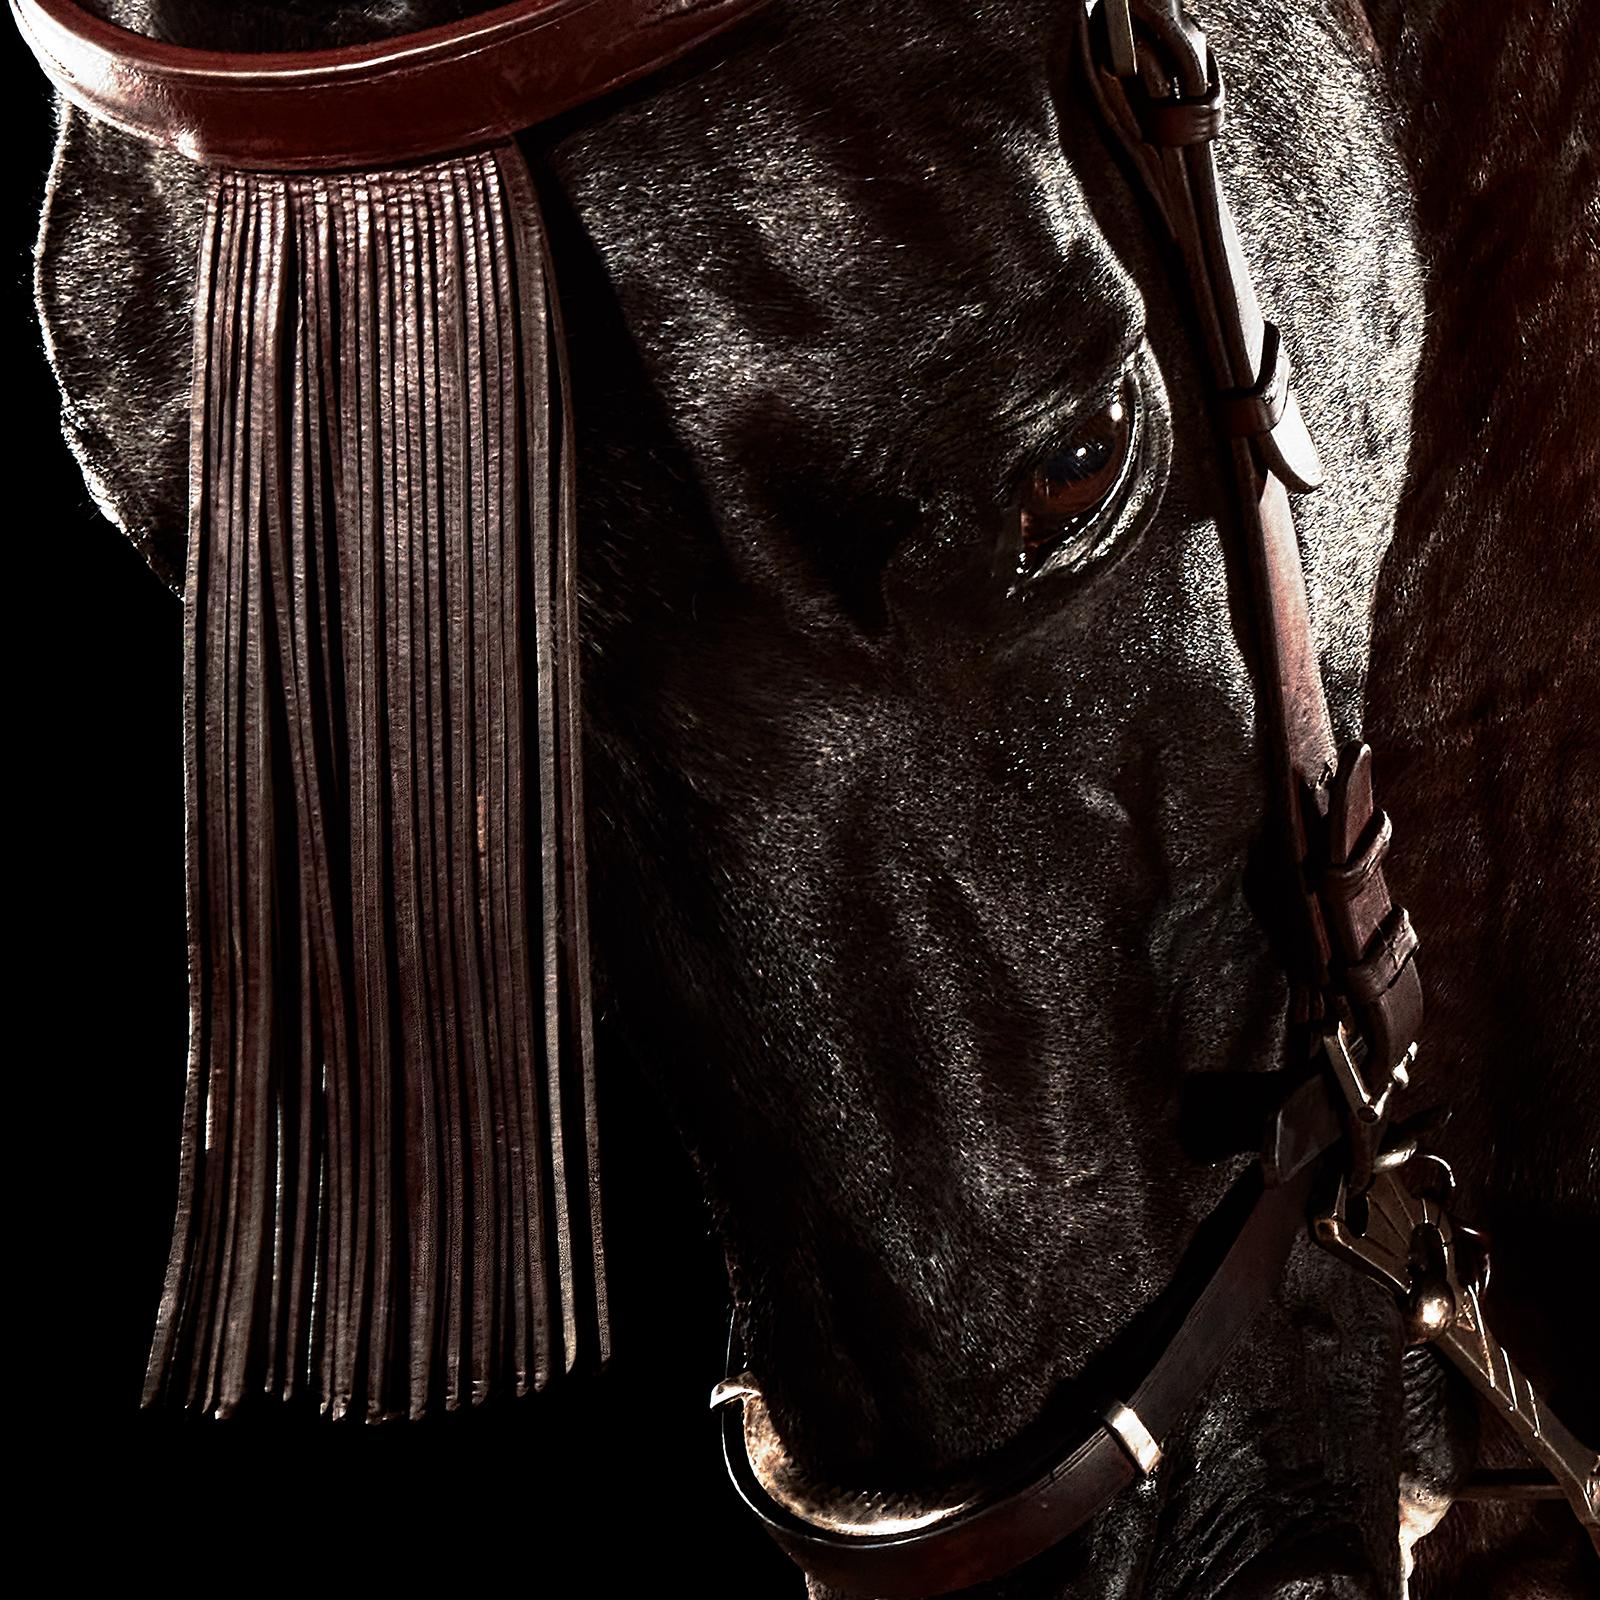 Horse 4  - Signed limited edition horse pigment print, still life square, Animal - Photograph by Peter Ridge